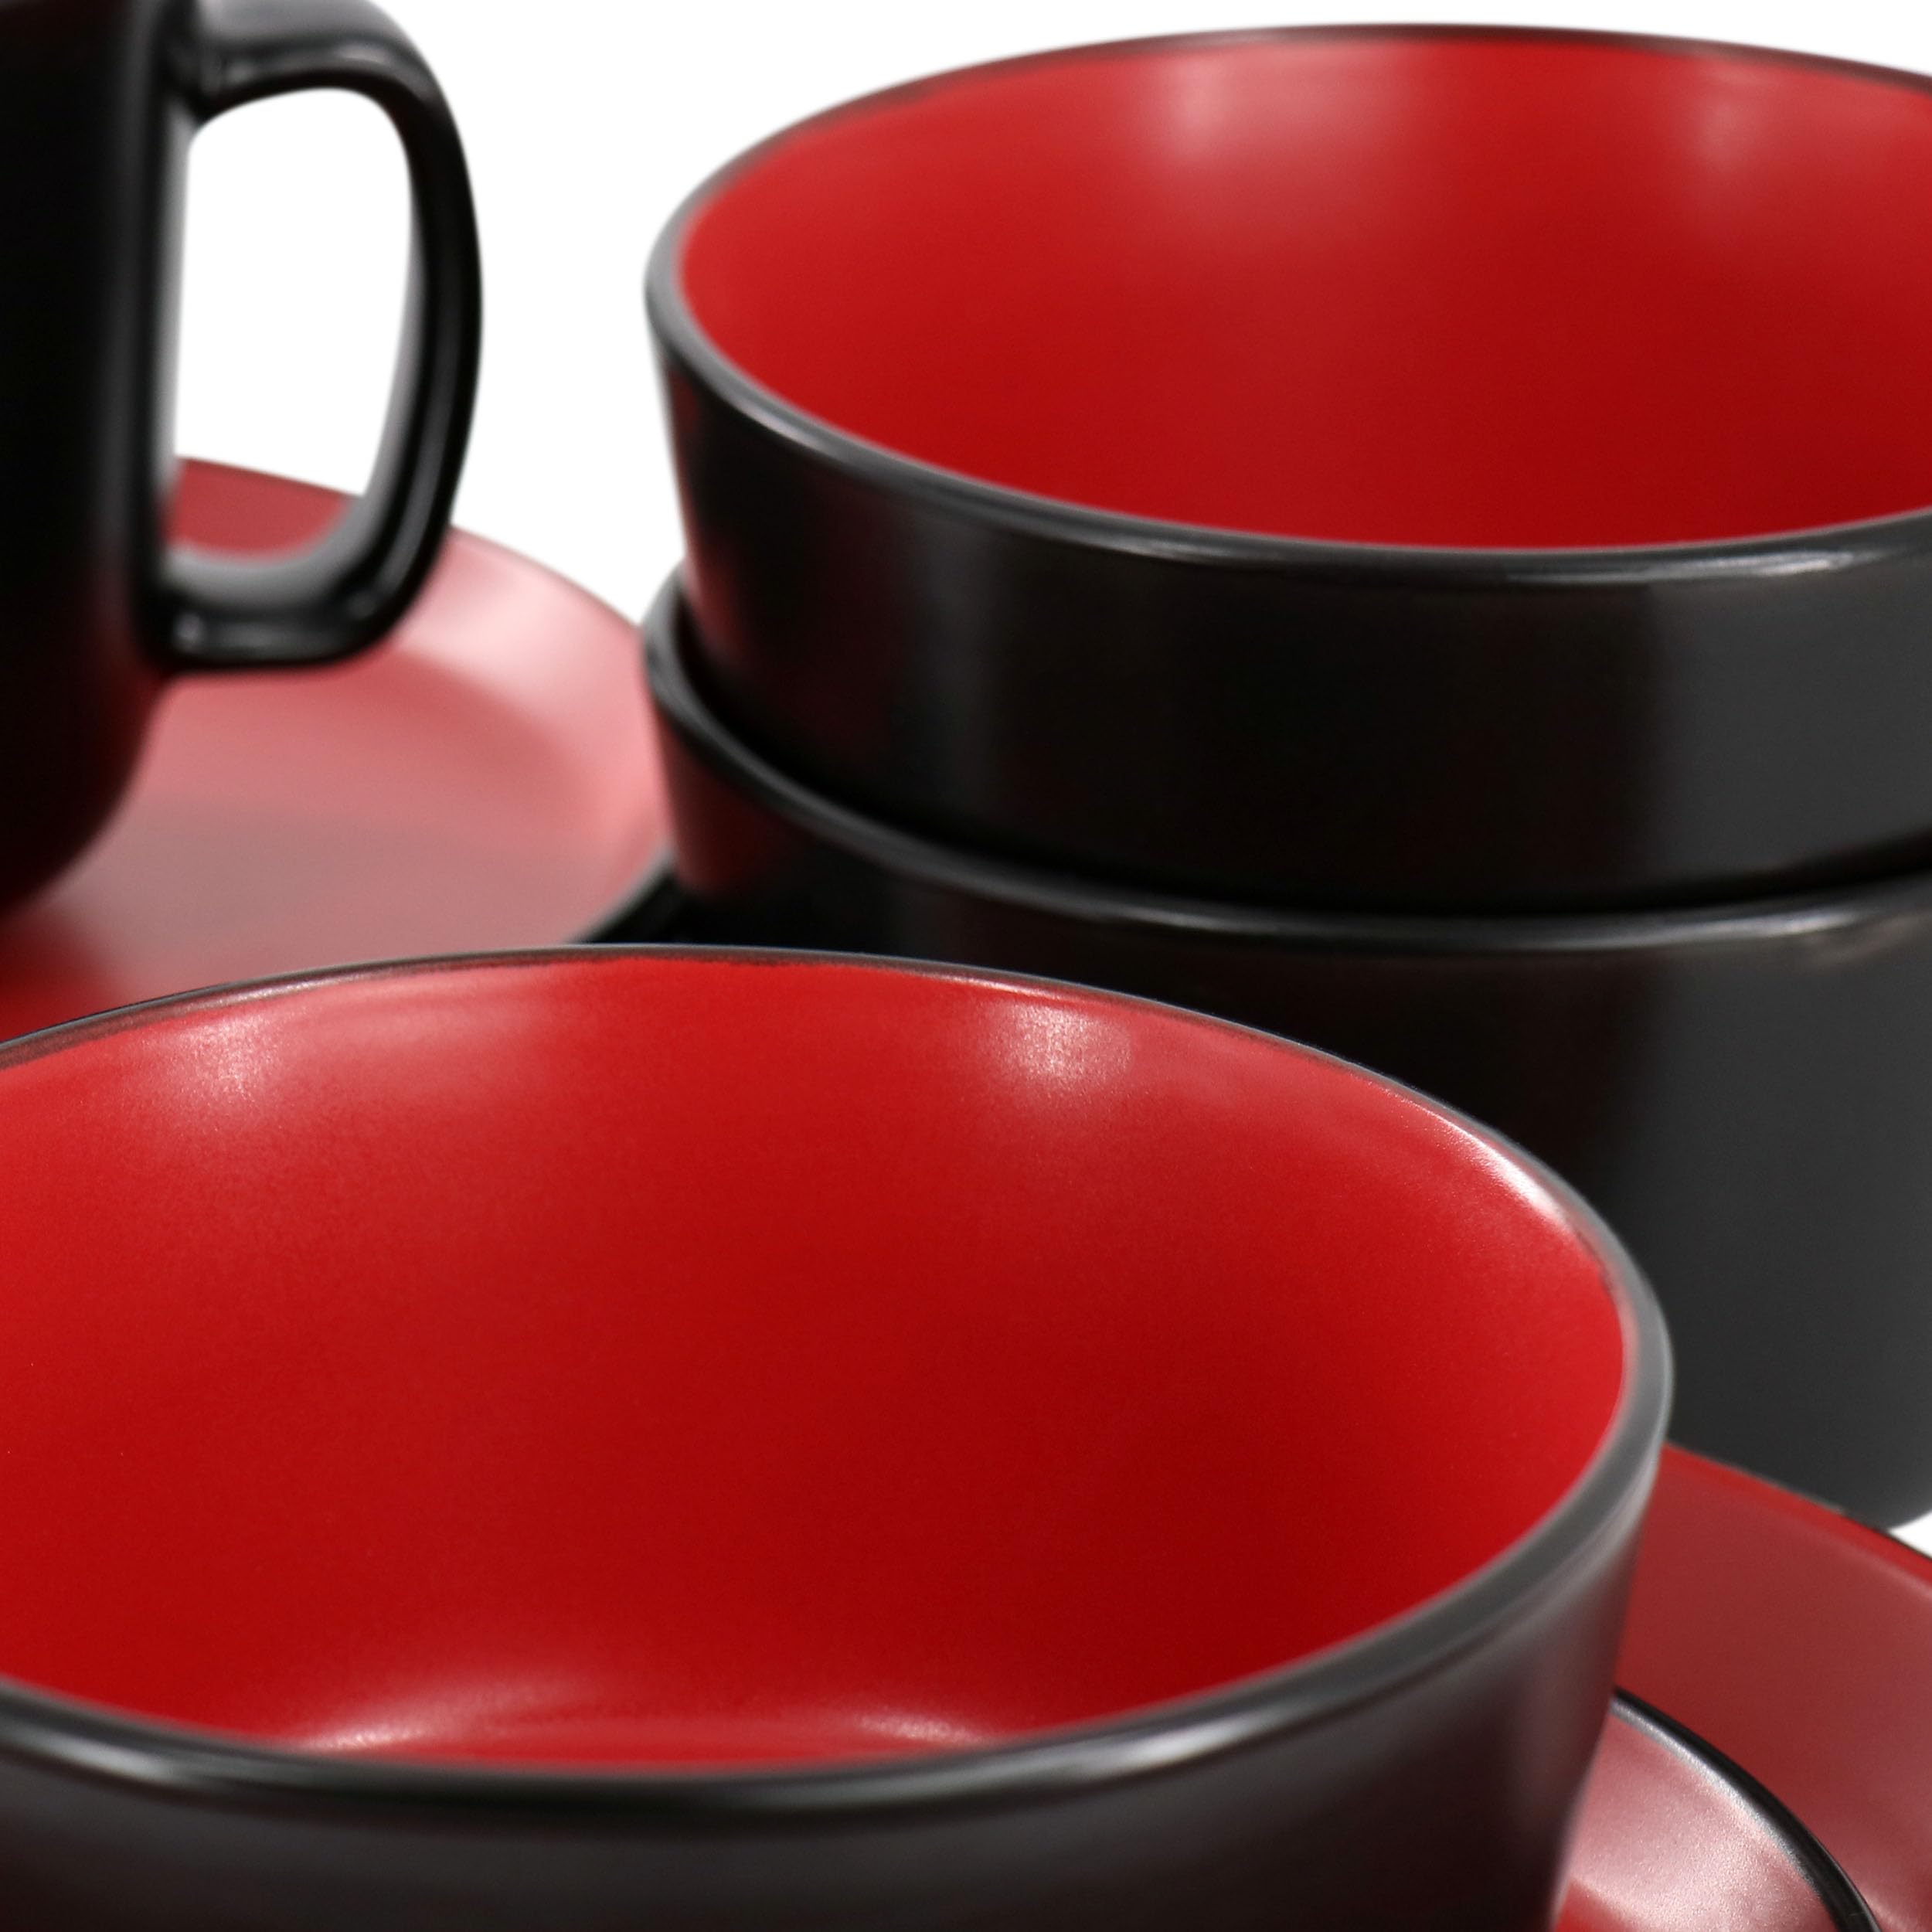 Elama Bacarra 16 Piece Stoneware Dinnerware Set in Two Tone Black and Red